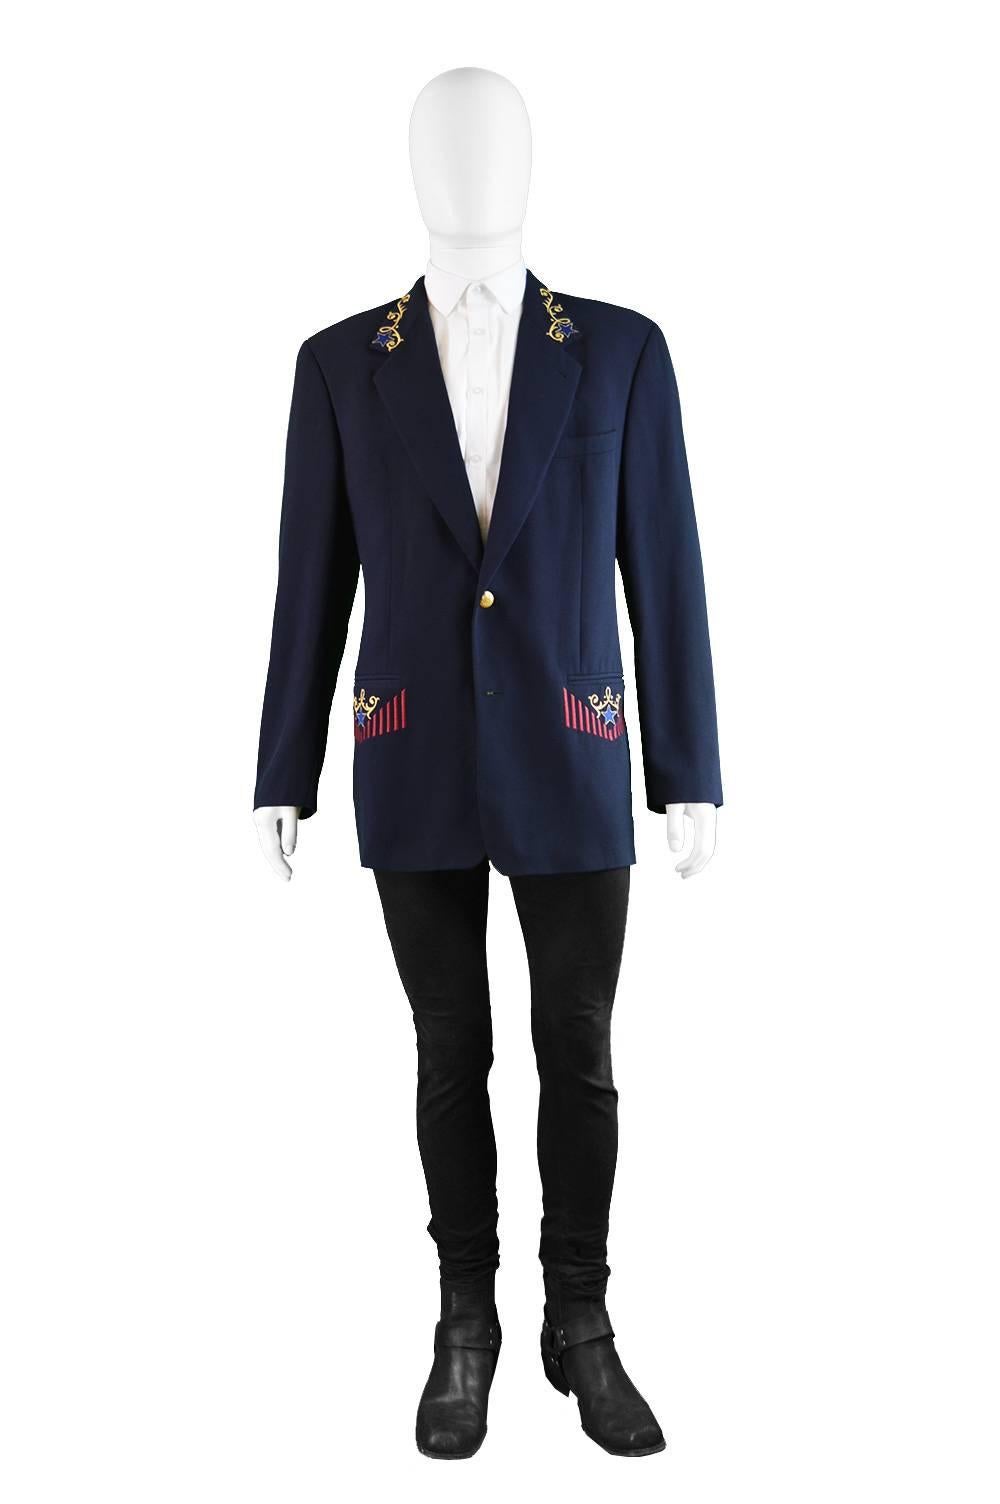 A stunning vintage mens blazer from the 80s by luxury Italian fashion house, Byblos - who Gianni Versace was once the designer for. In a dark navy blue pure wool with gold lamé and satin embroidery to the notched lapels and pockets. With single